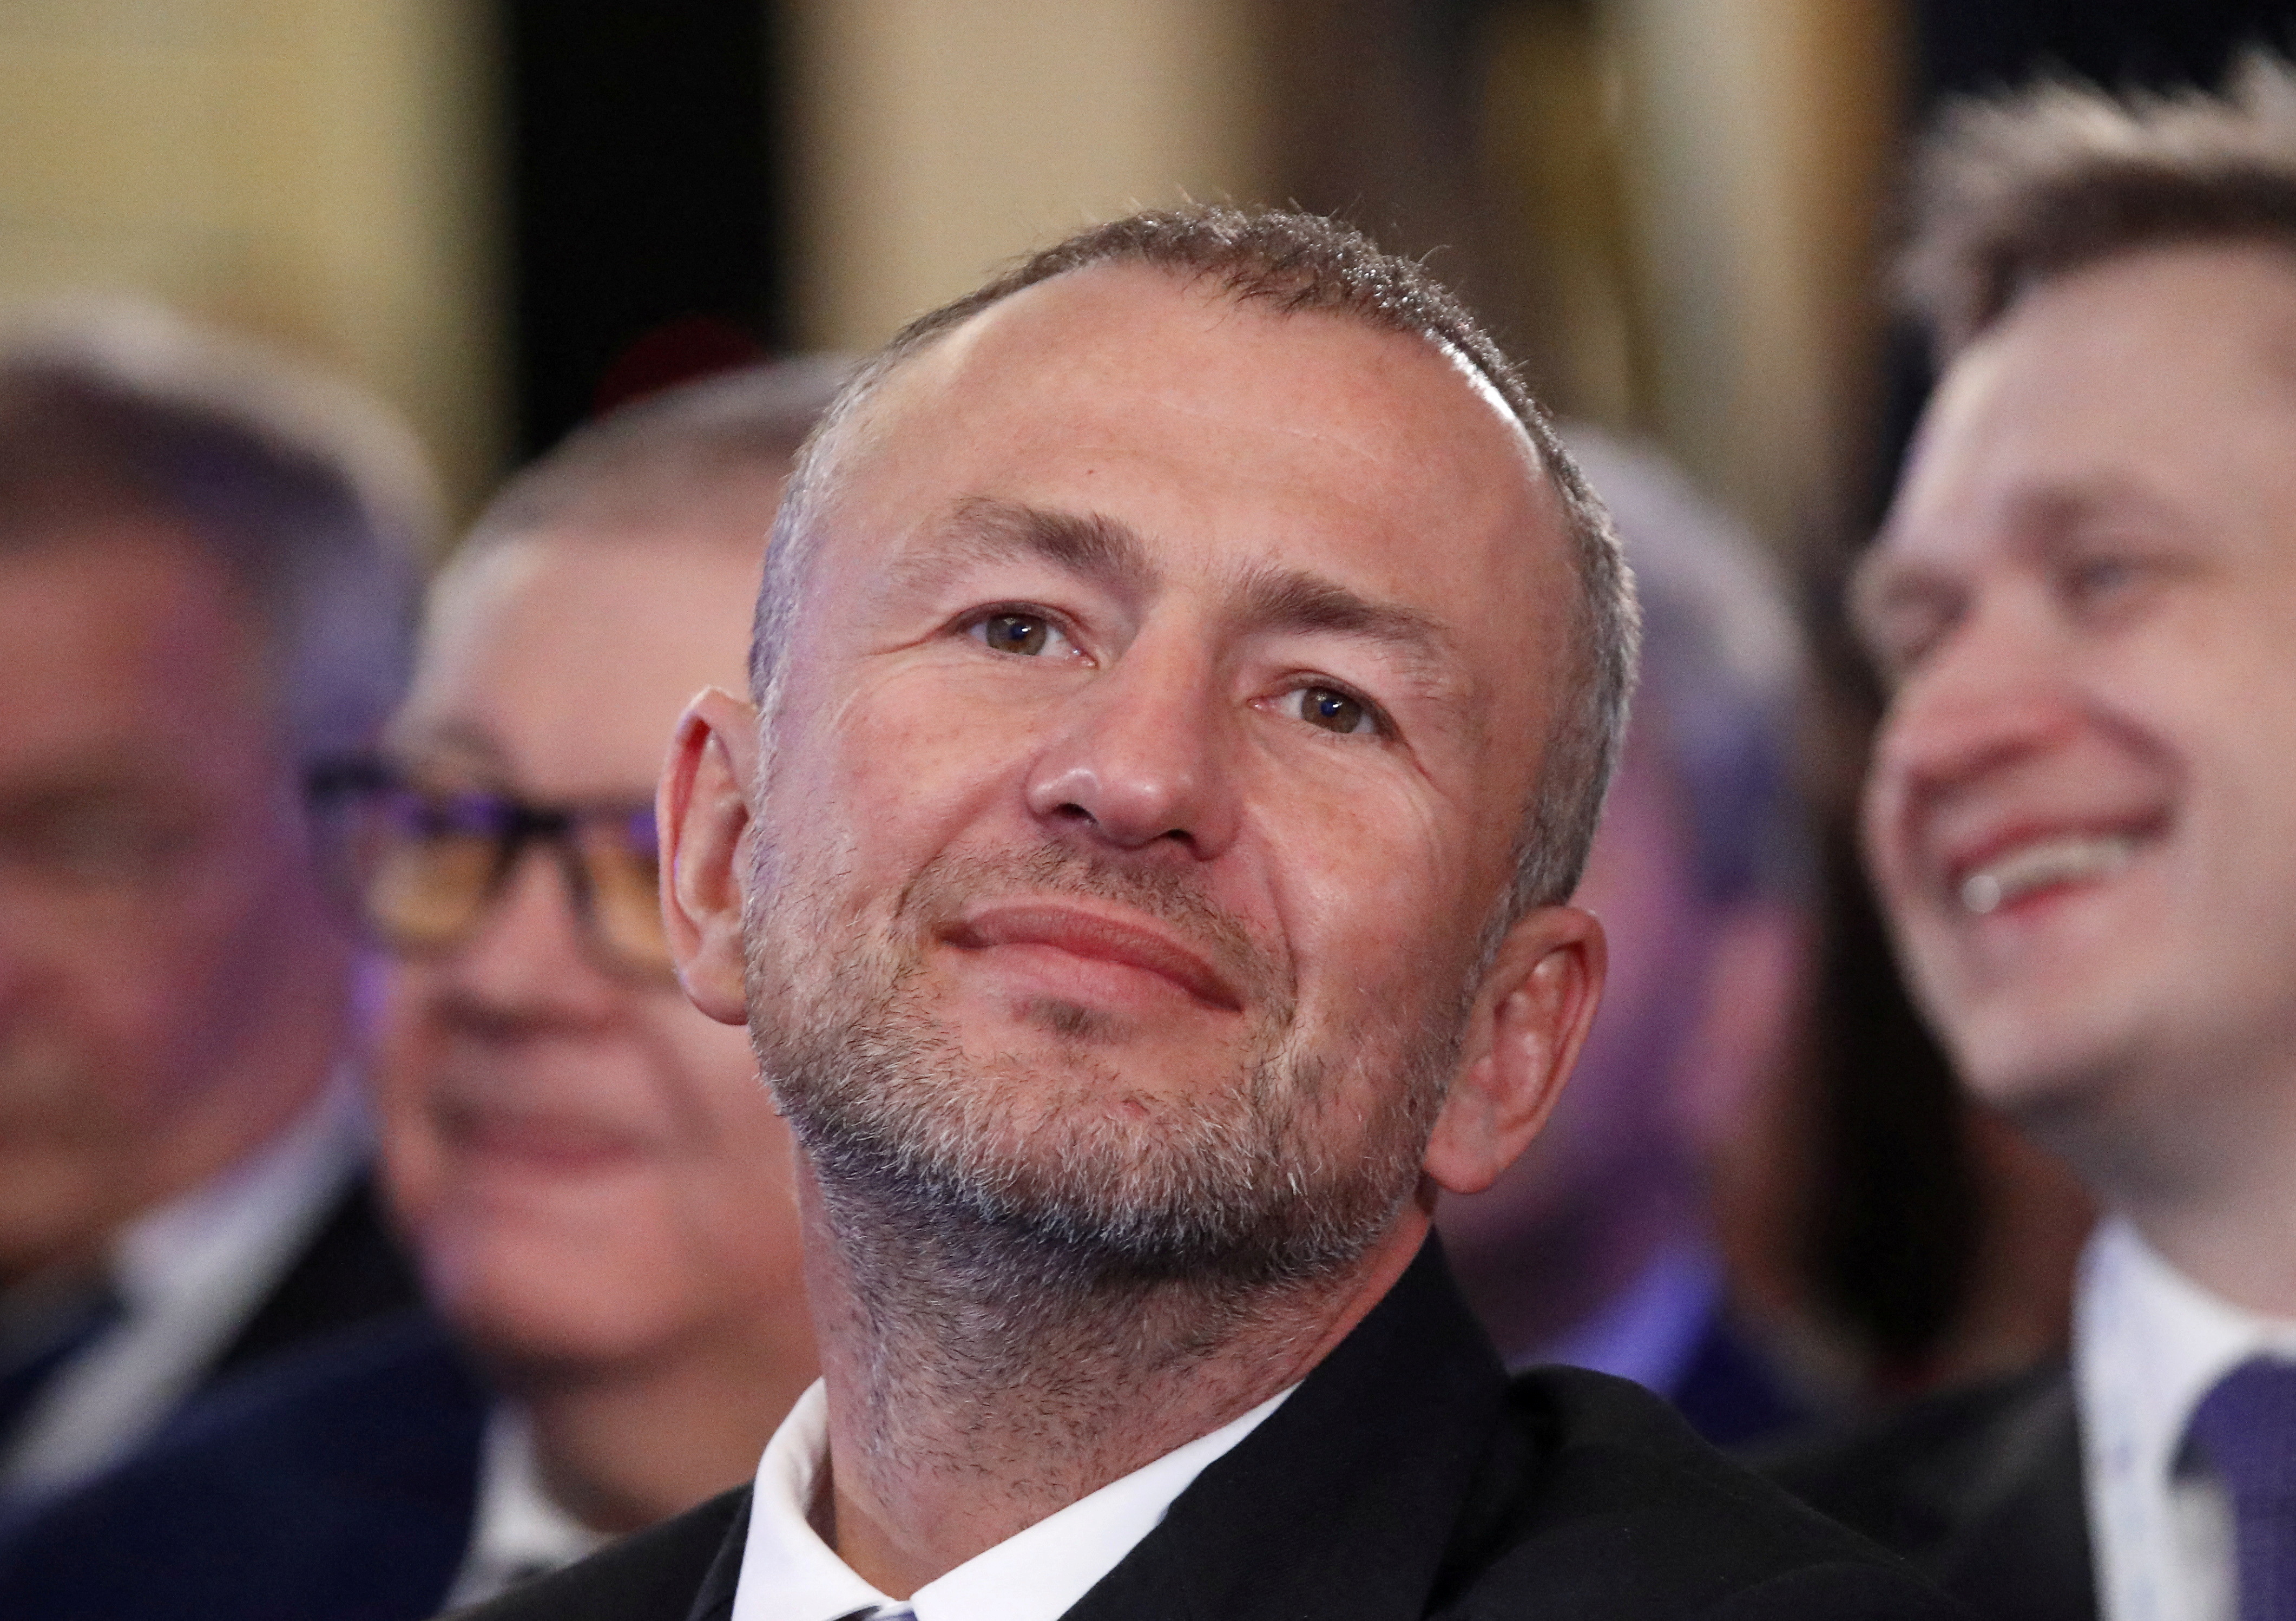 Russian billionaire Melnichenko attends a session during the Week of Russian Business in Moscow